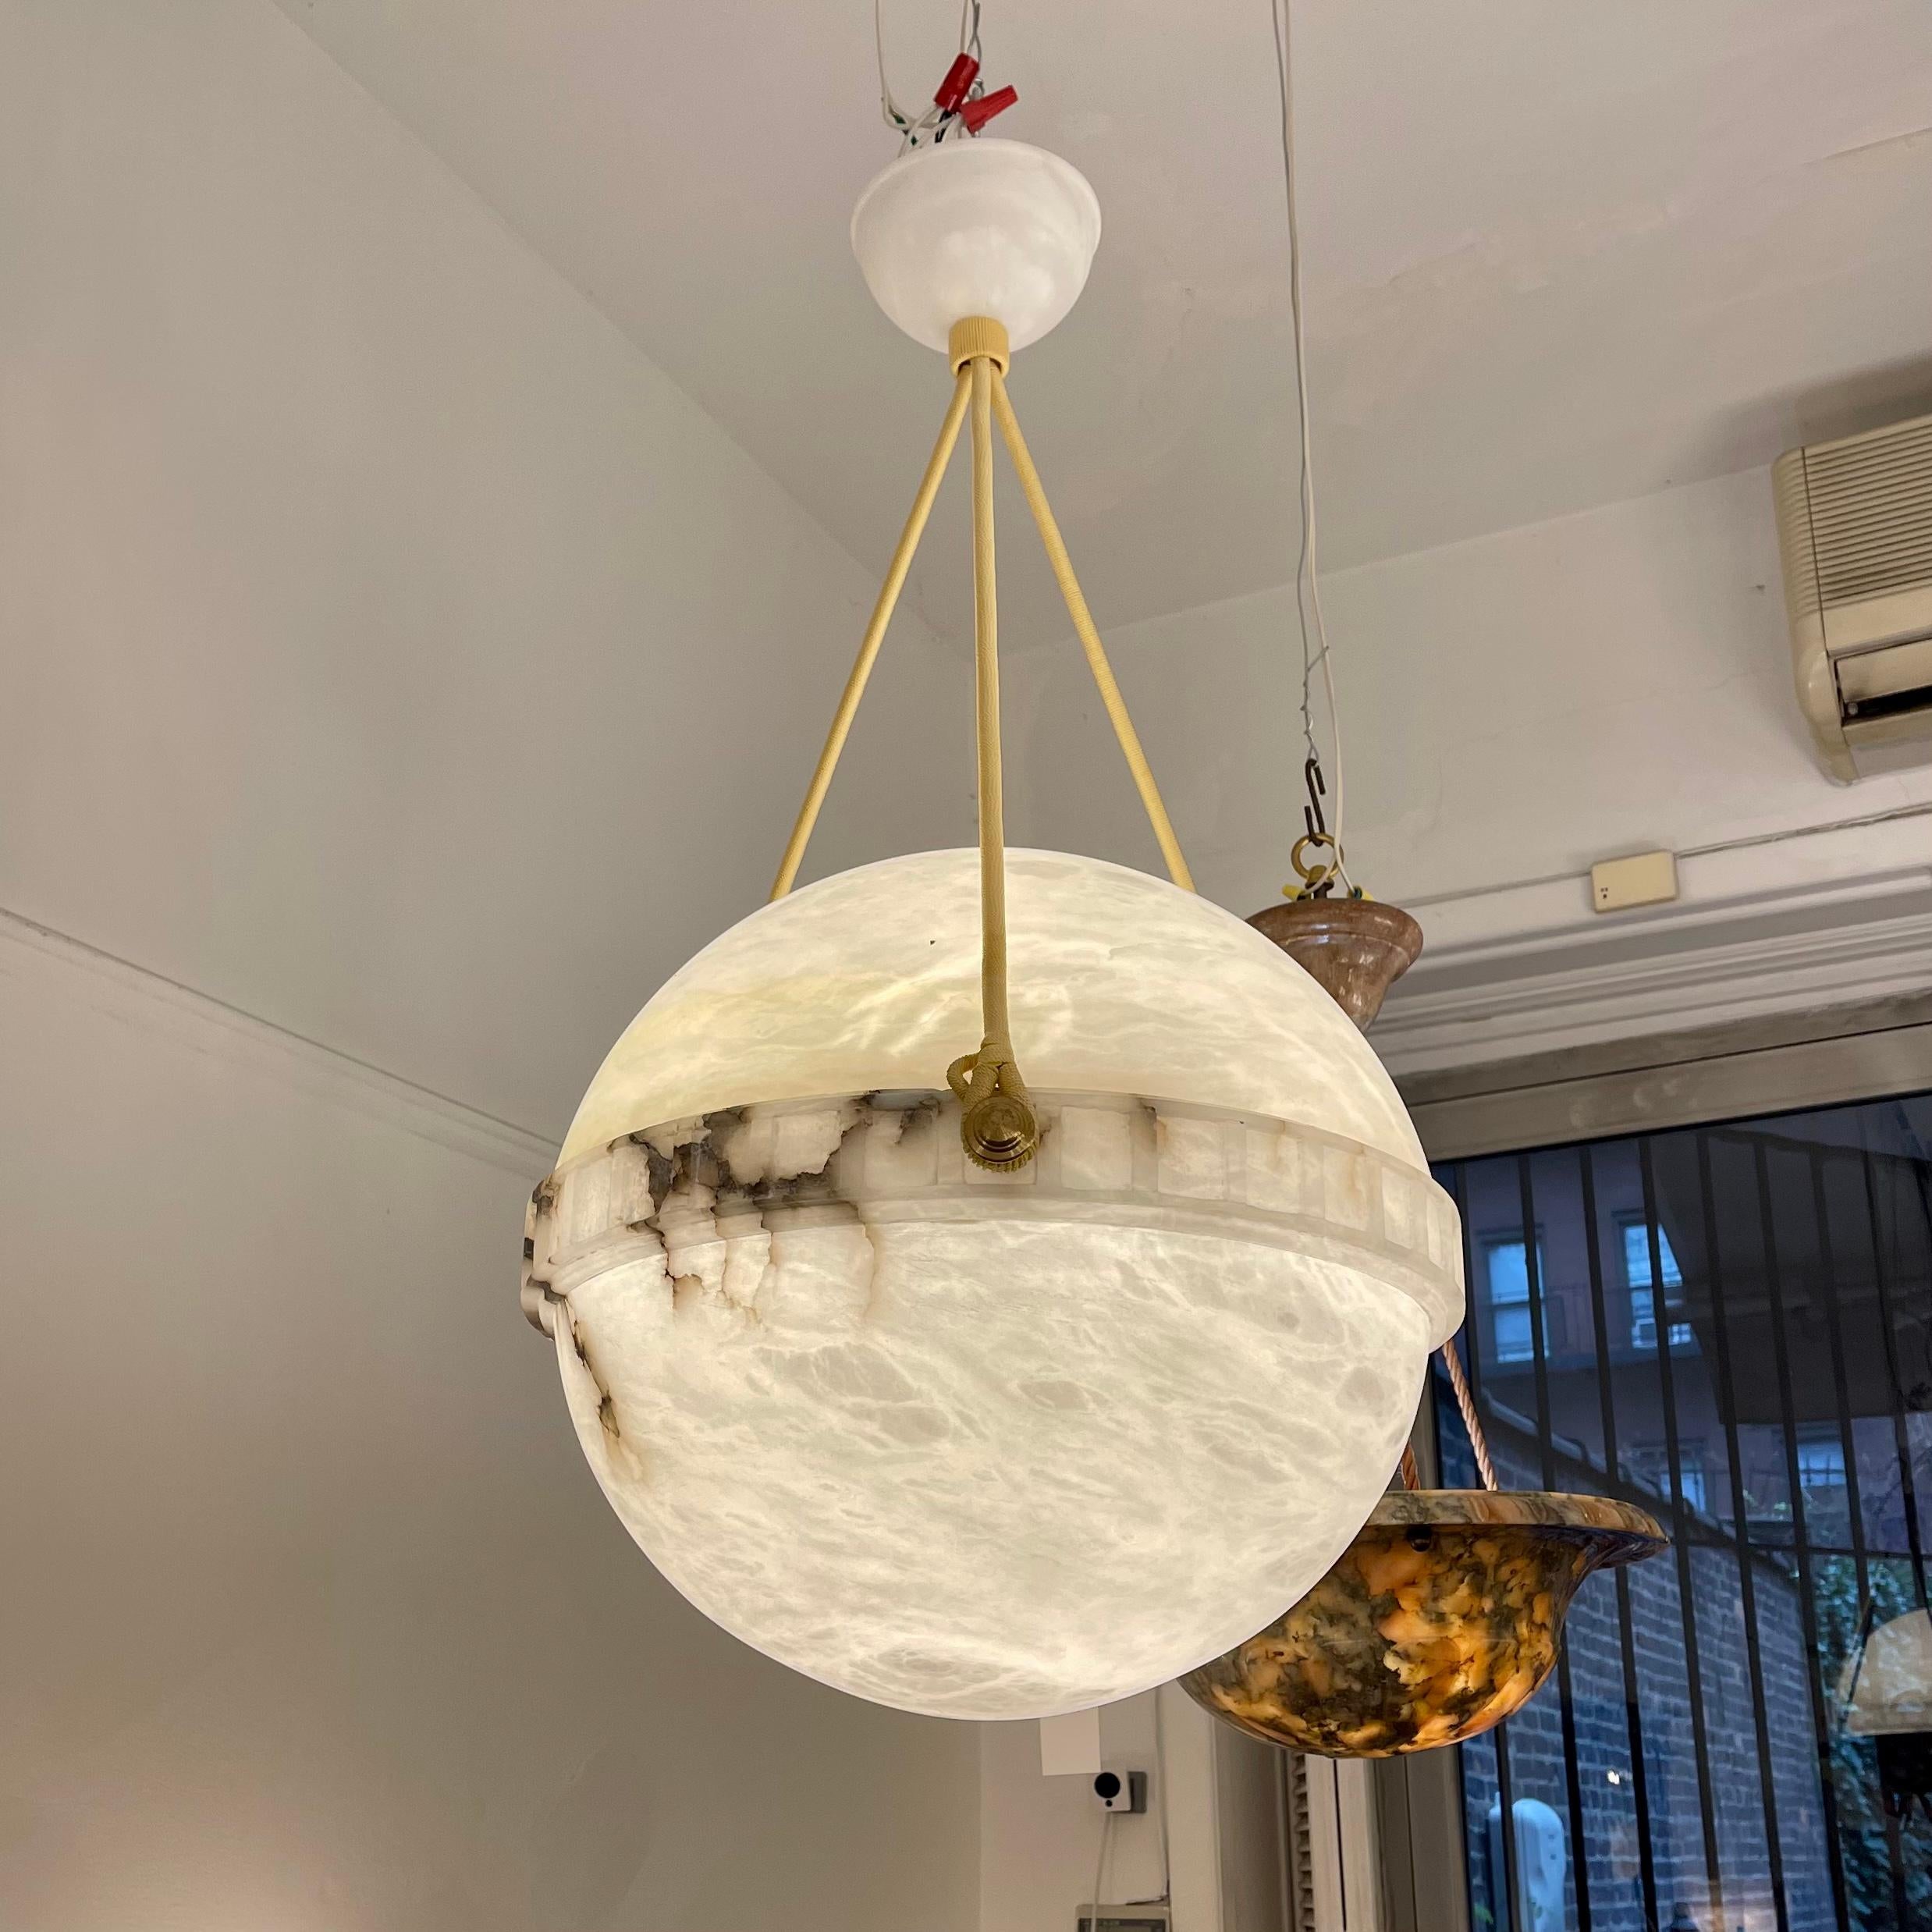 Carved from a single block of alabaster stone, primarily white with dark black veinings running through both hemispheres. Features a matching canopy, and currently mounts one 75W max LED bulb. Rewiring to your specificied drop is included in the